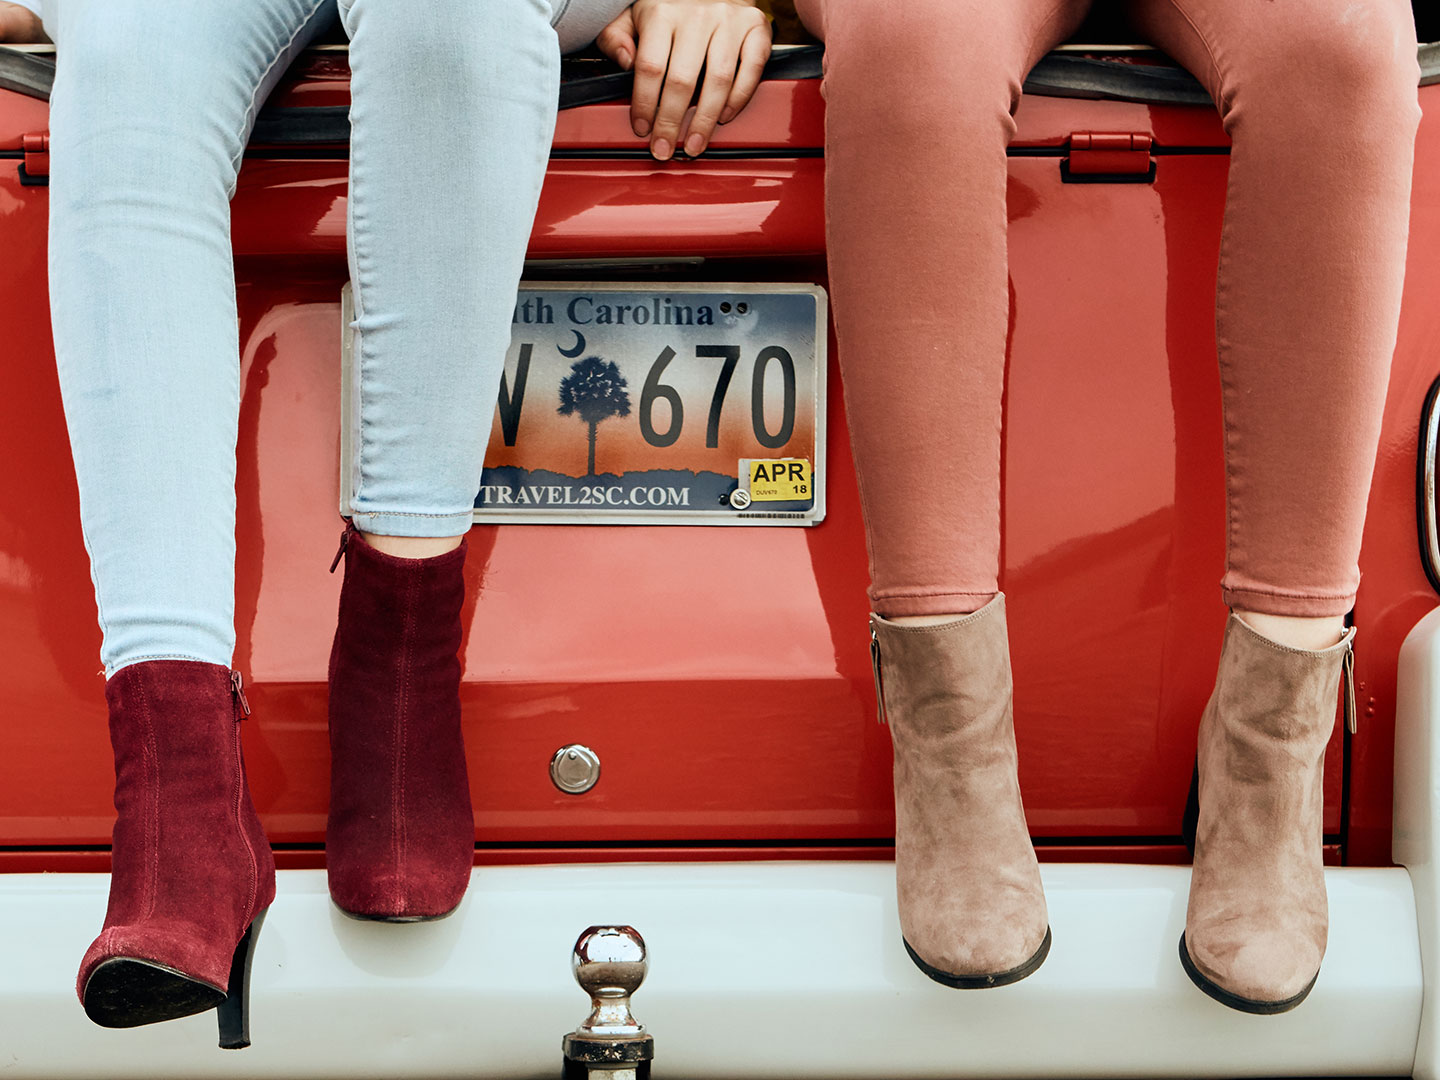 Models legs and feet dangling from back of a car photographed by footwear photographer Kate Benson.